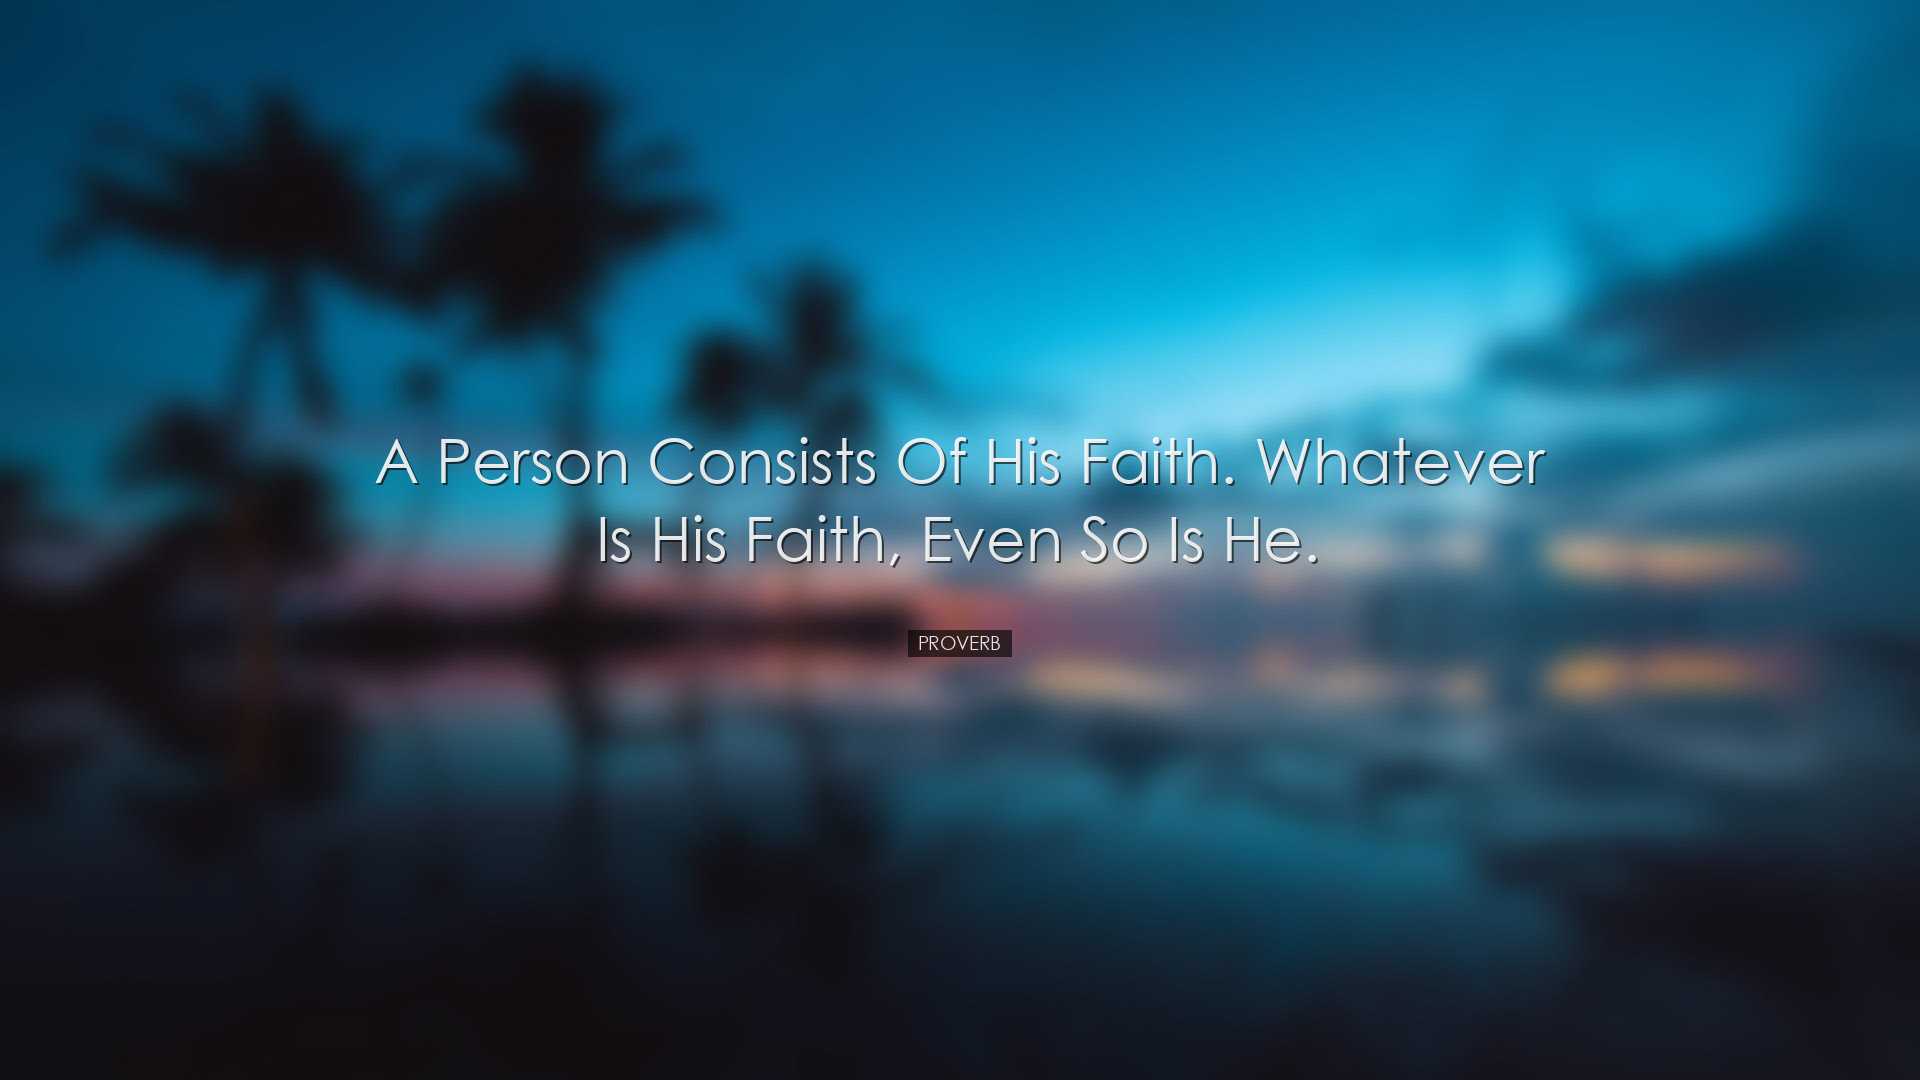 A person consists of his faith. Whatever is his faith, even so is